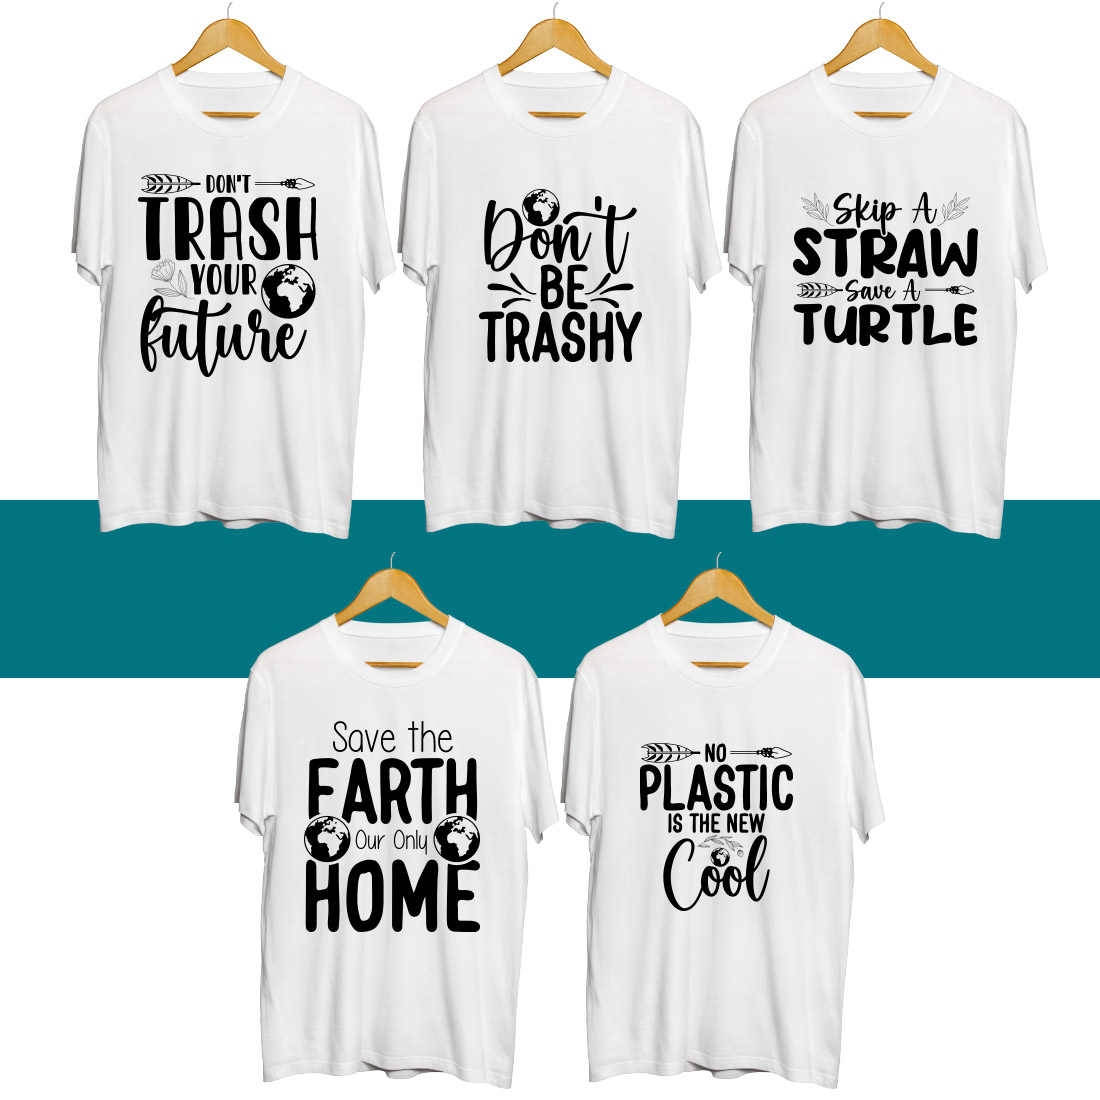 Four t - shirts that say.